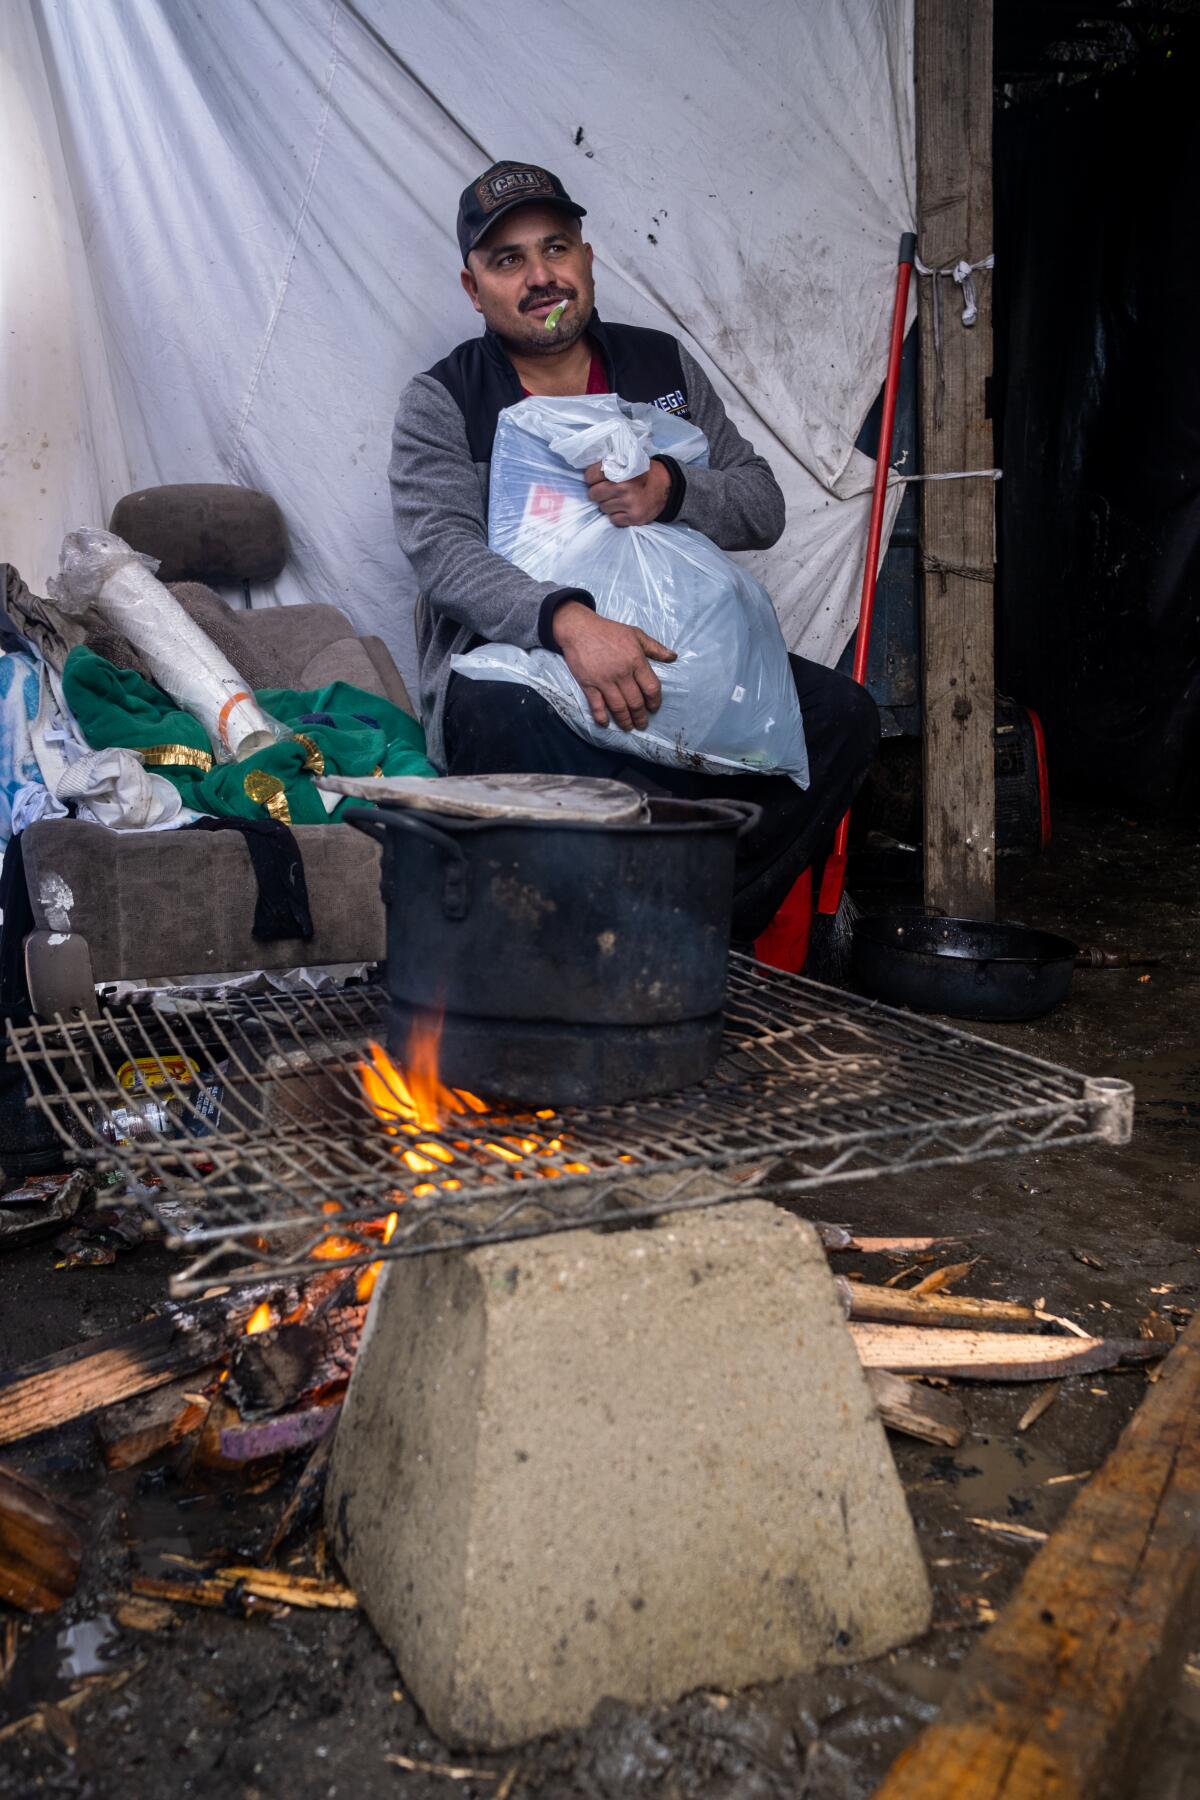 Reynaldo Roman, 39, sits in his makeshift home near a pot of beans he is cooking.